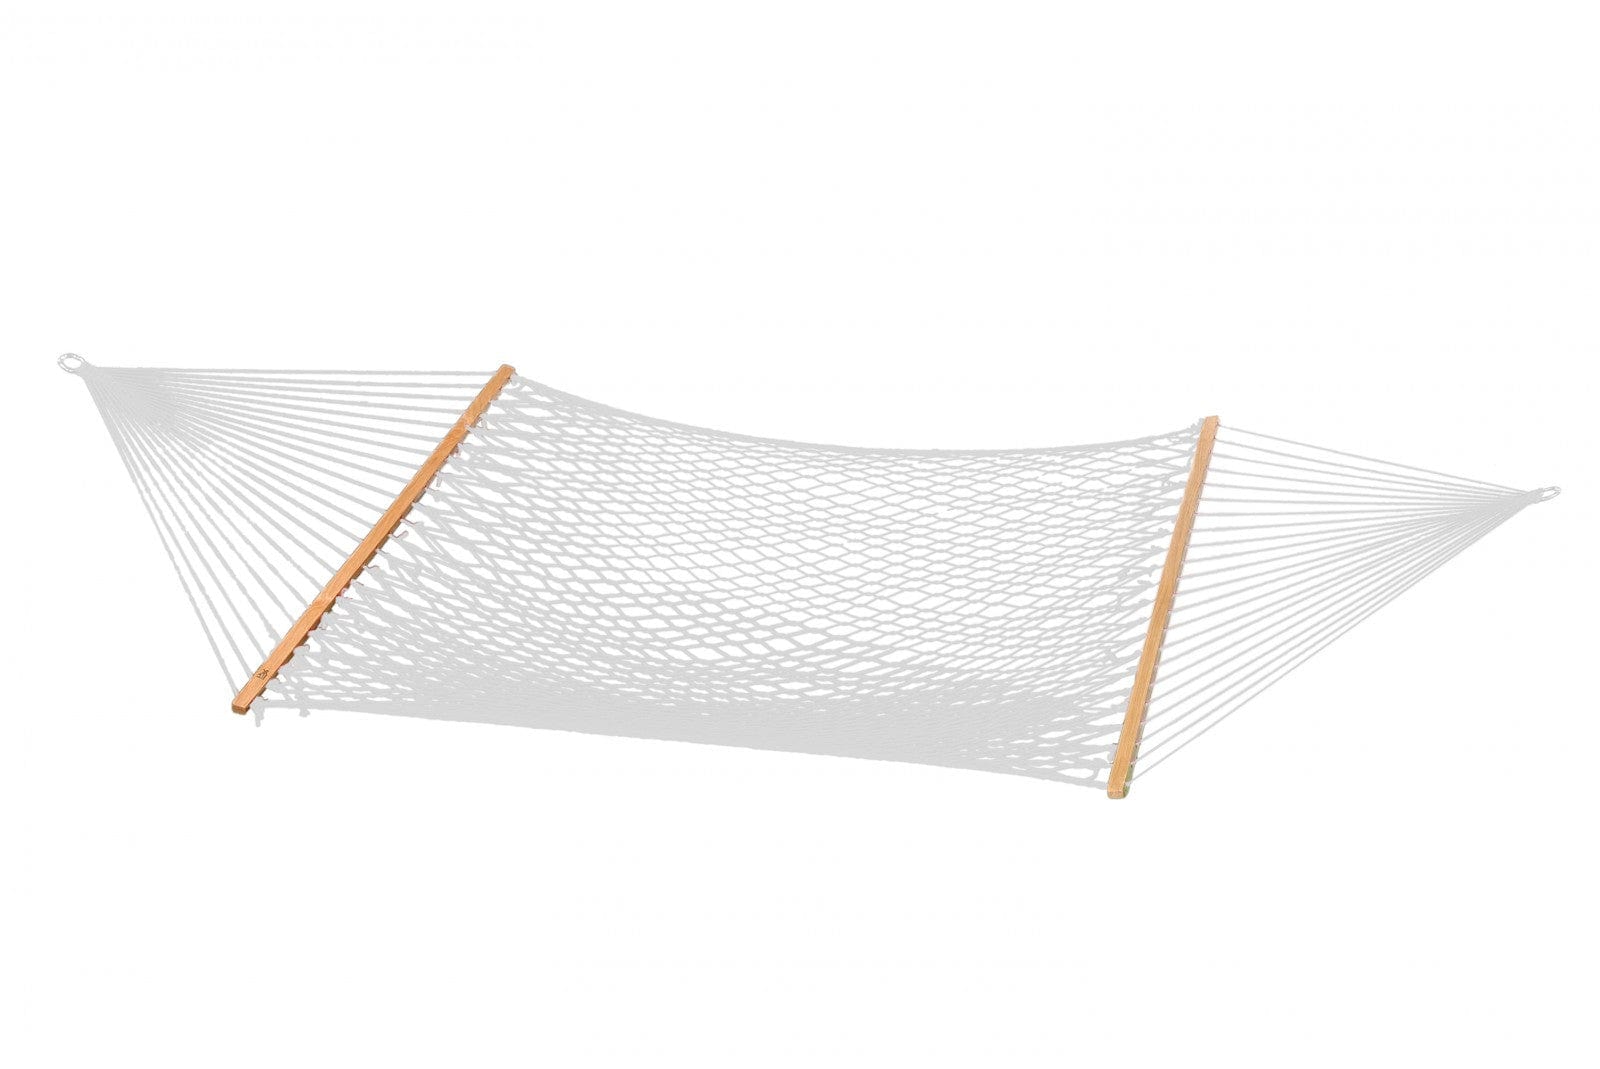 Bliss Classic Poly Rope Hammock - Outdoor Art Pros